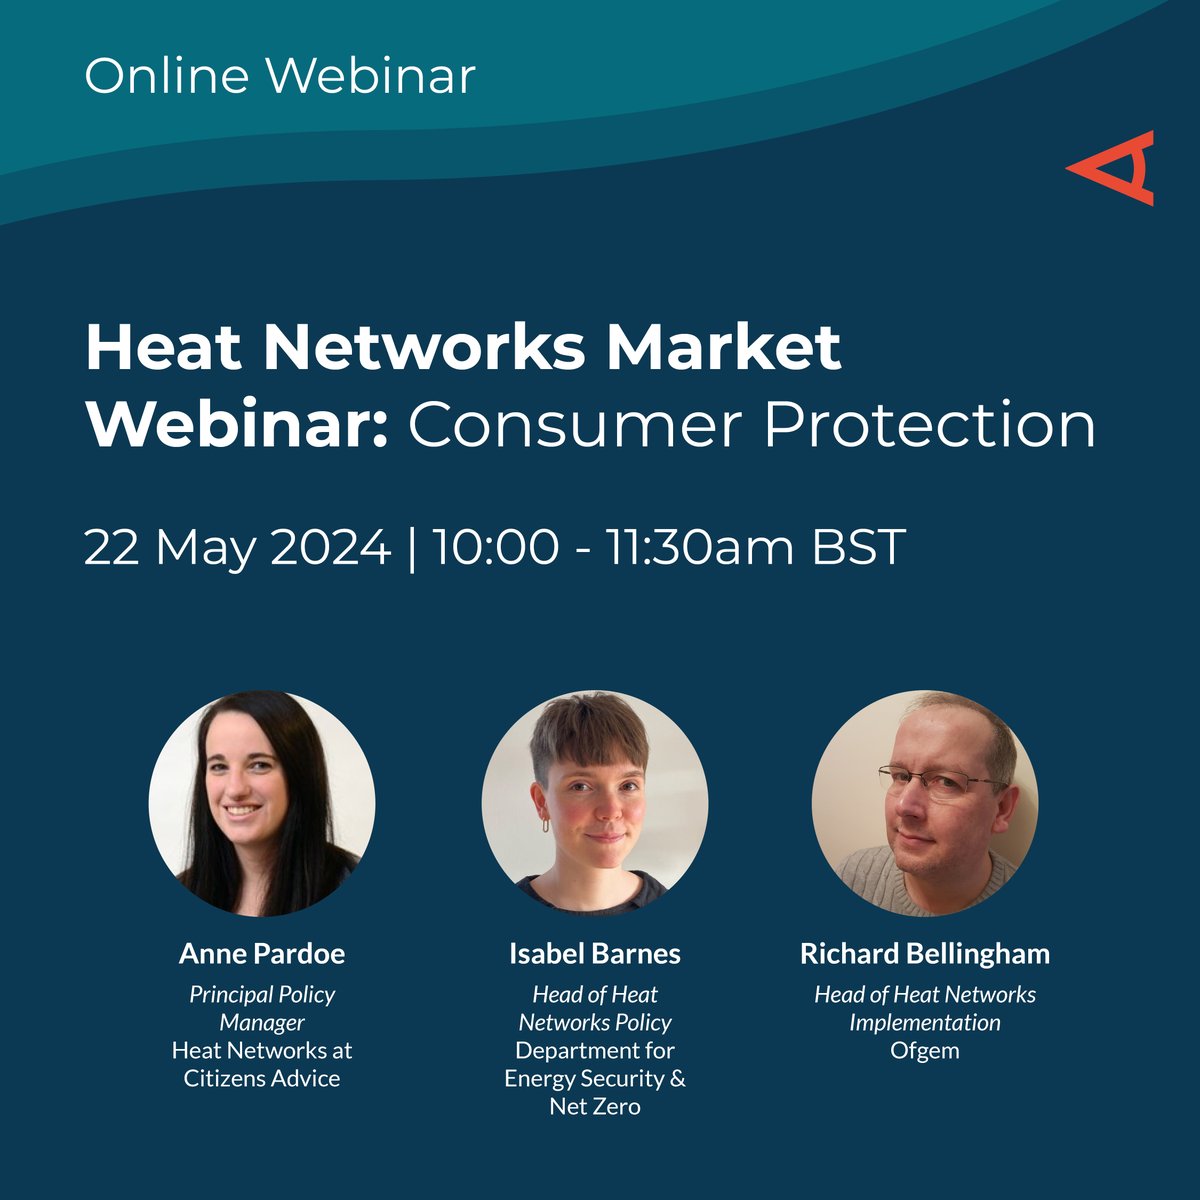 It's not too late to sign up for our Heat Networks Market Webinar on consumer protection. Join us tomorrow from 10:00am - 11:30am BST as we discuss the progress towards heat network regulation and consumer protection. Register here: teams.microsoft.com/registration/s…